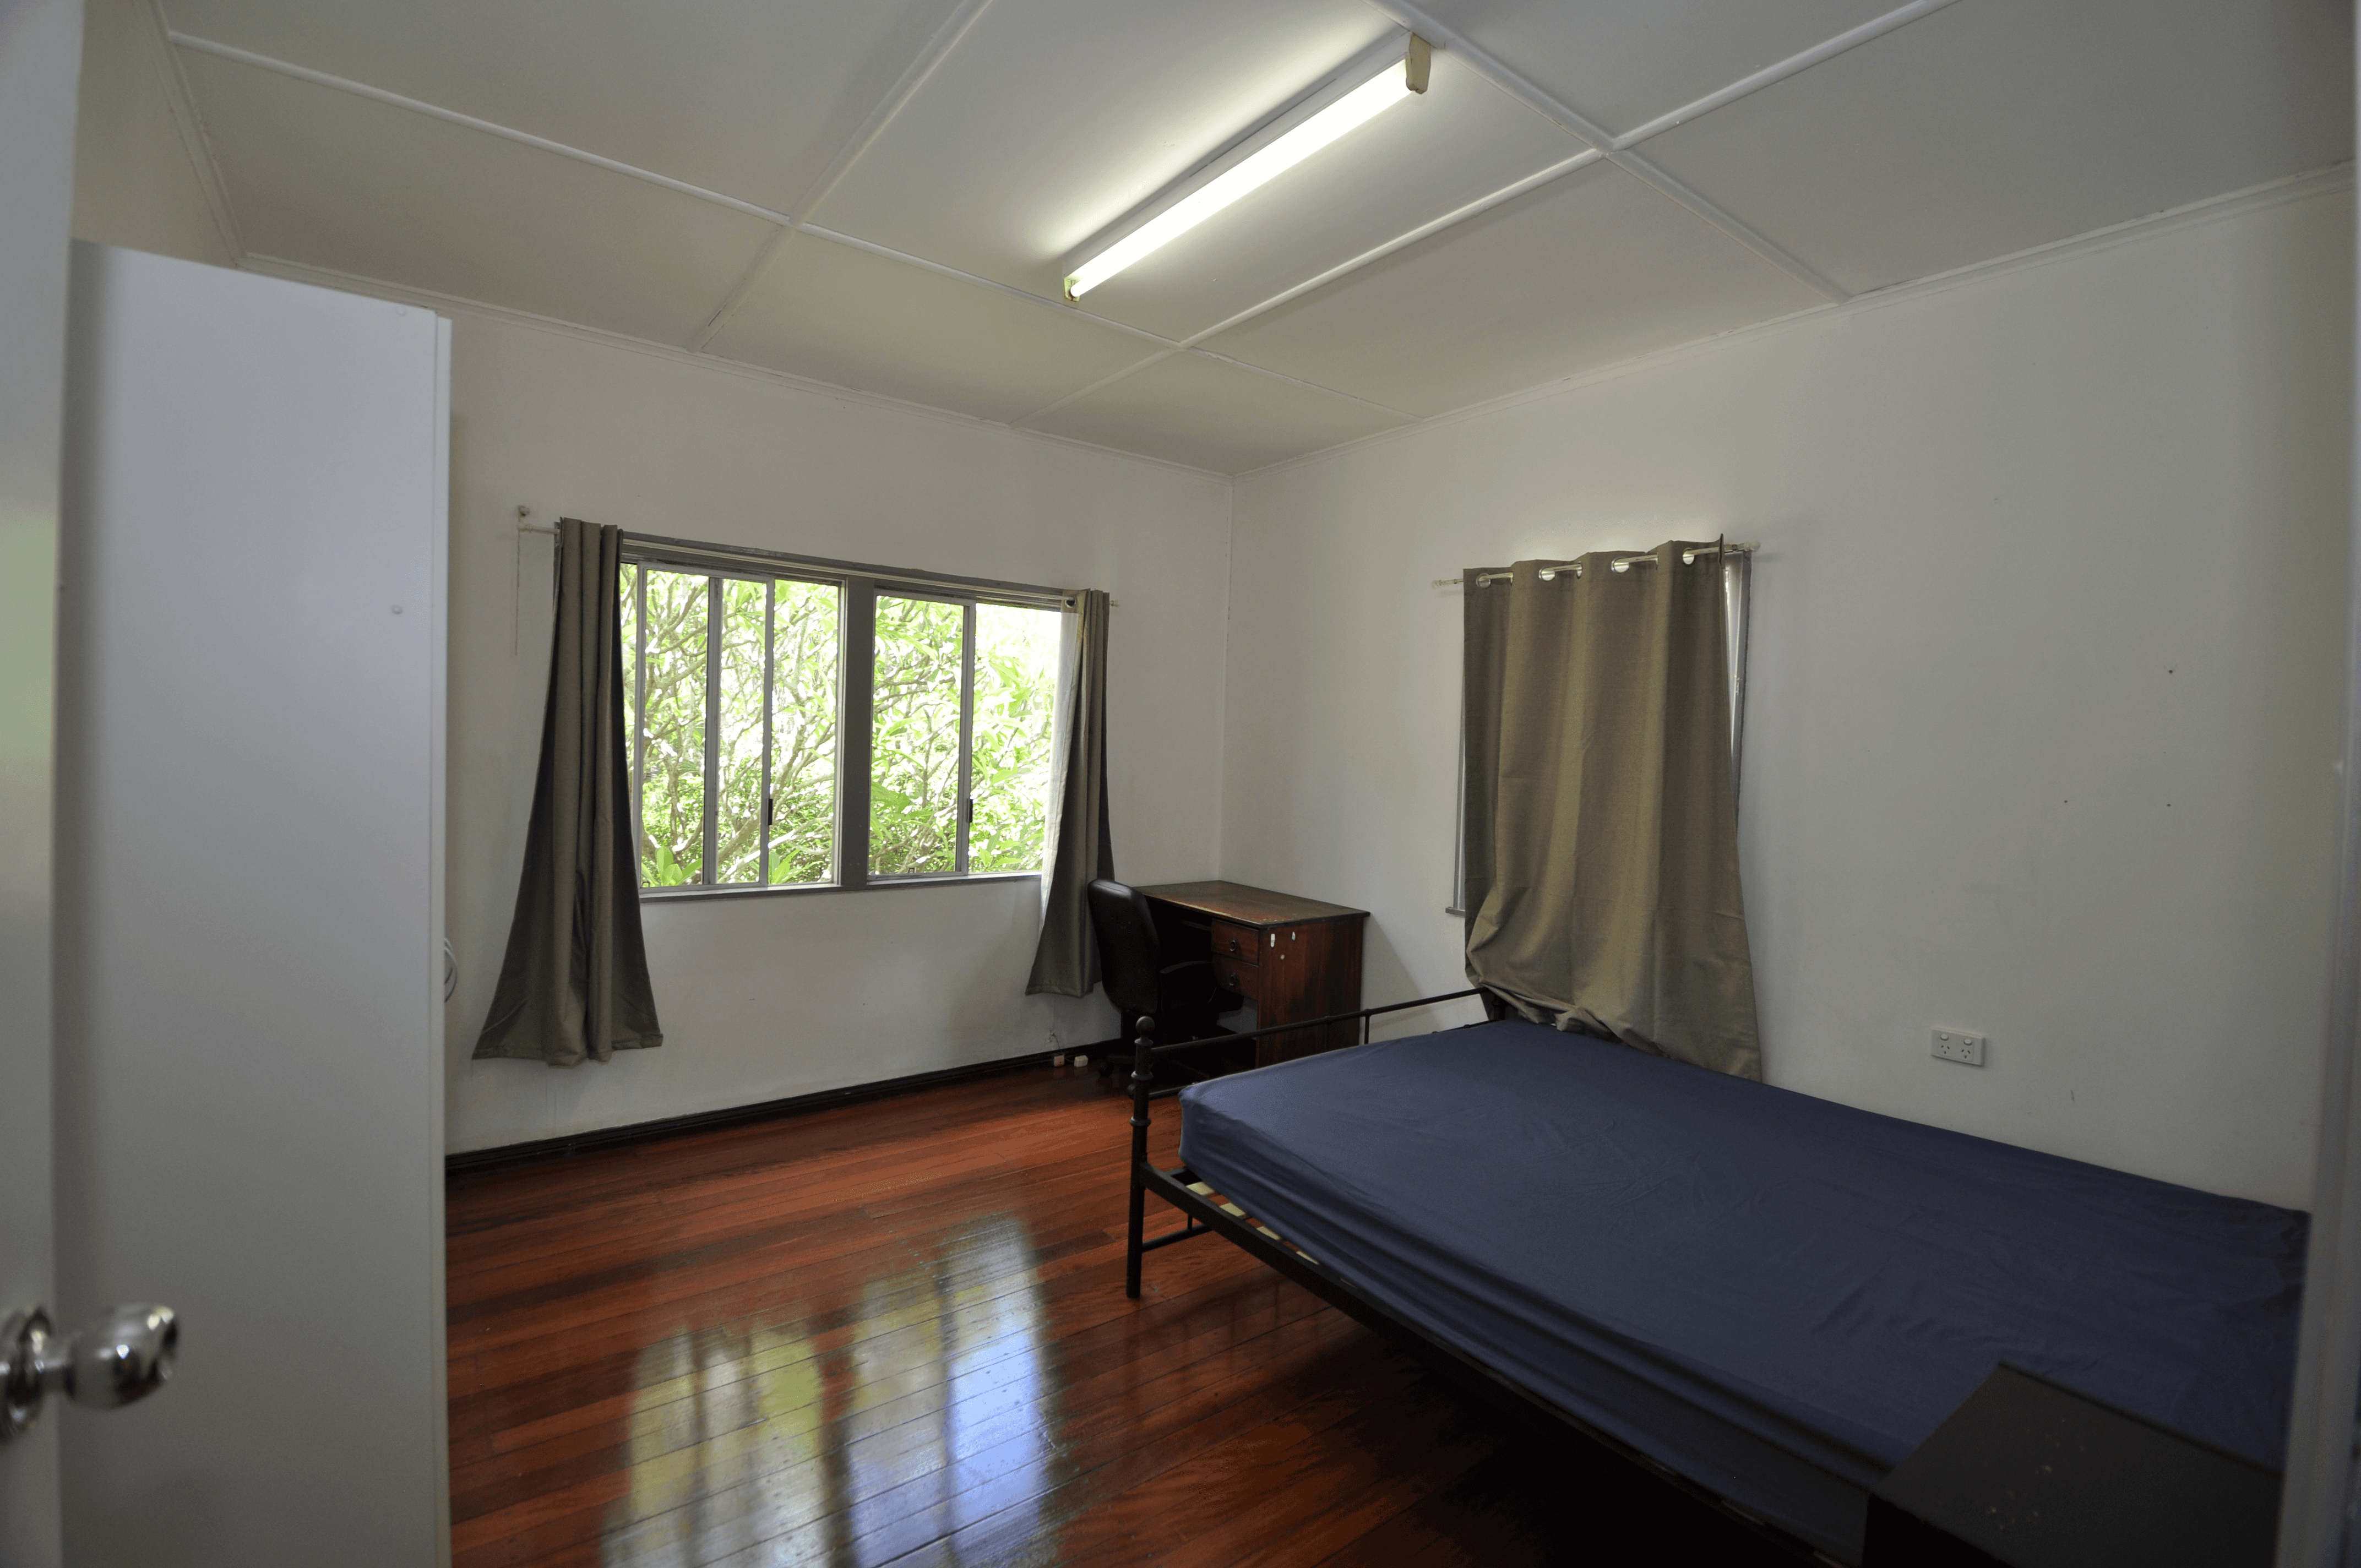 246 Sir Fred Schonell Drive, ST LUCIA, QLD 4067